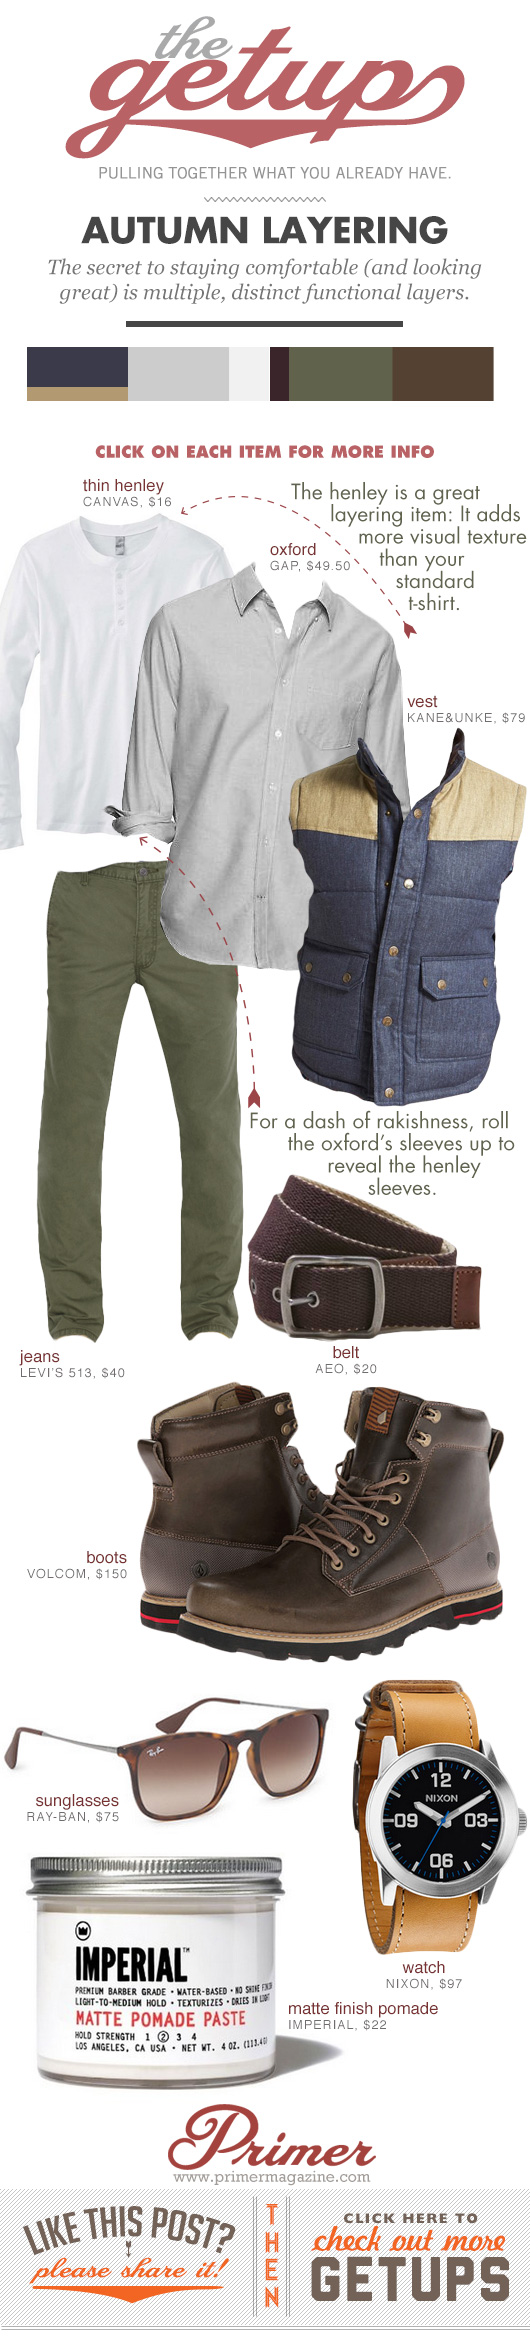 Getup Autumn Layering - Vest, button up shirt, green pants, chunky boots